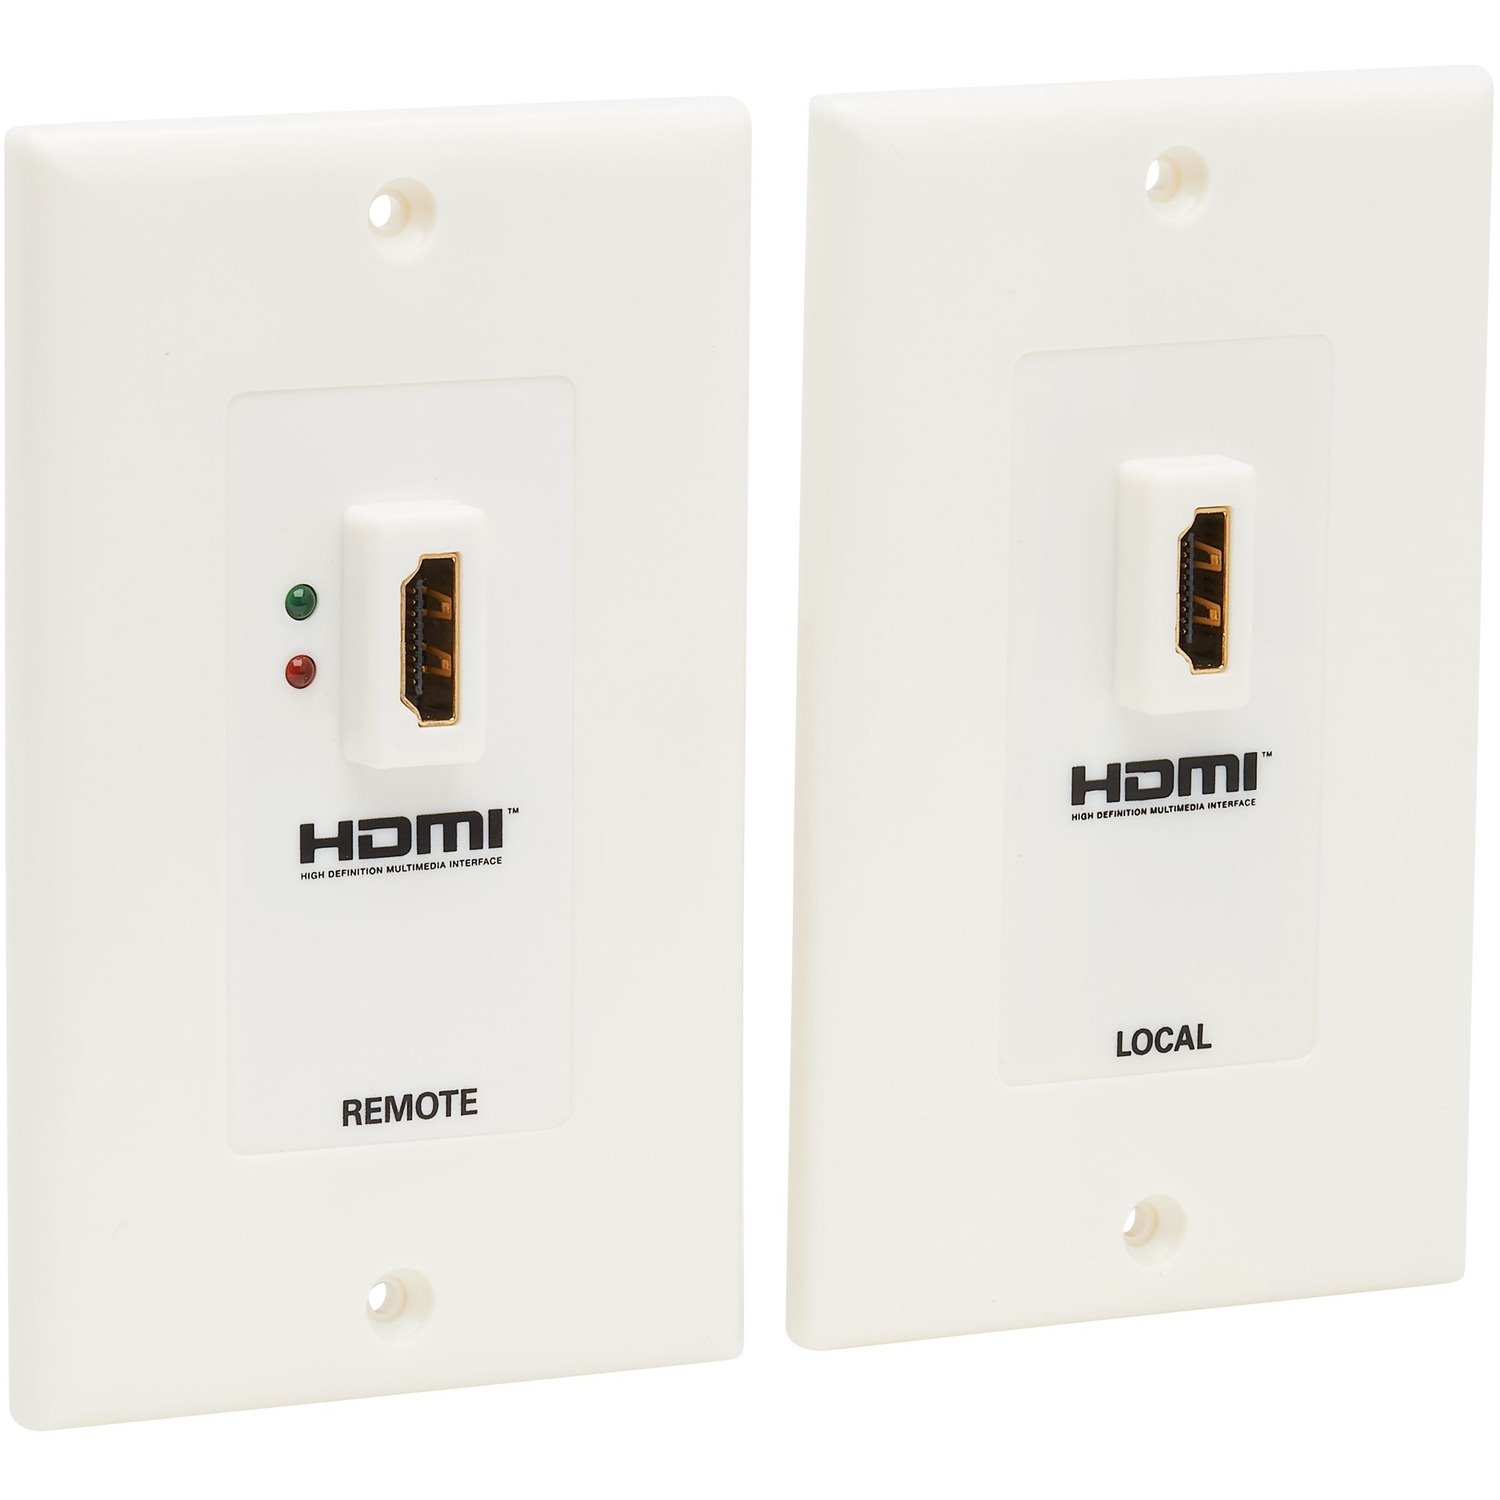 Eaton Tripp Lite Series HDMI over Dual Cat5/Cat6 Extender Wall Plate Kit with Transmitter and Receiver, TAA